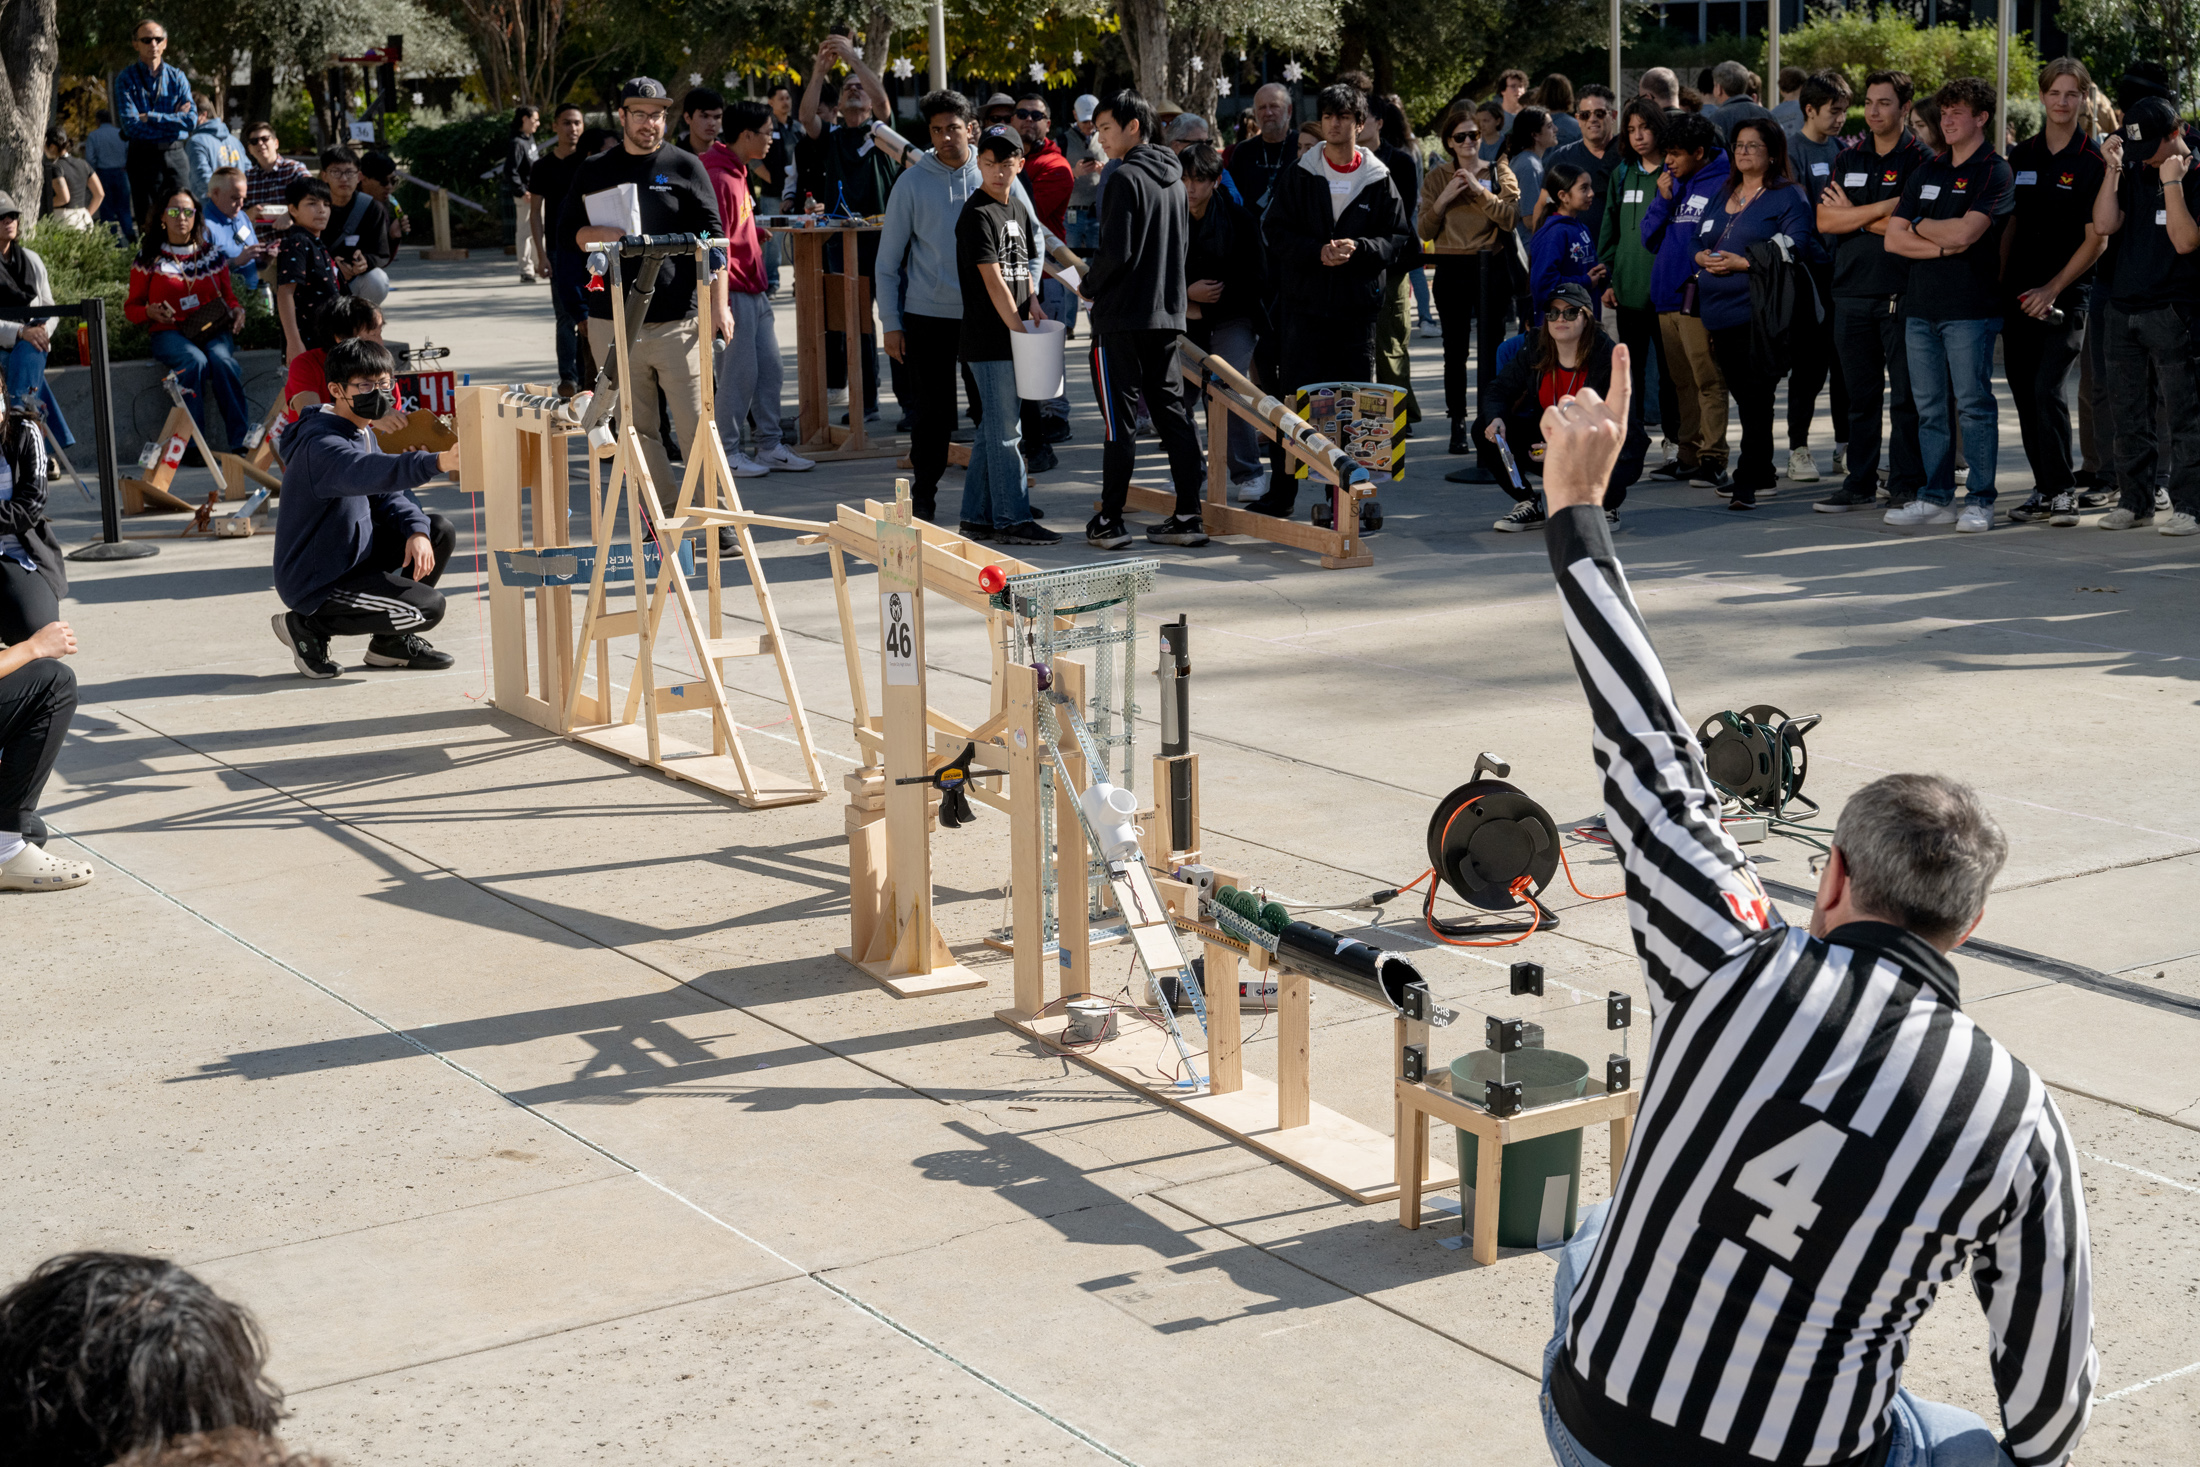 The homemade devices built by competing teams relied on catapults, crossbows, small motors, and more to accomplish seven consecutive steps to sink a crumpled piece of paper into a wastebasket.